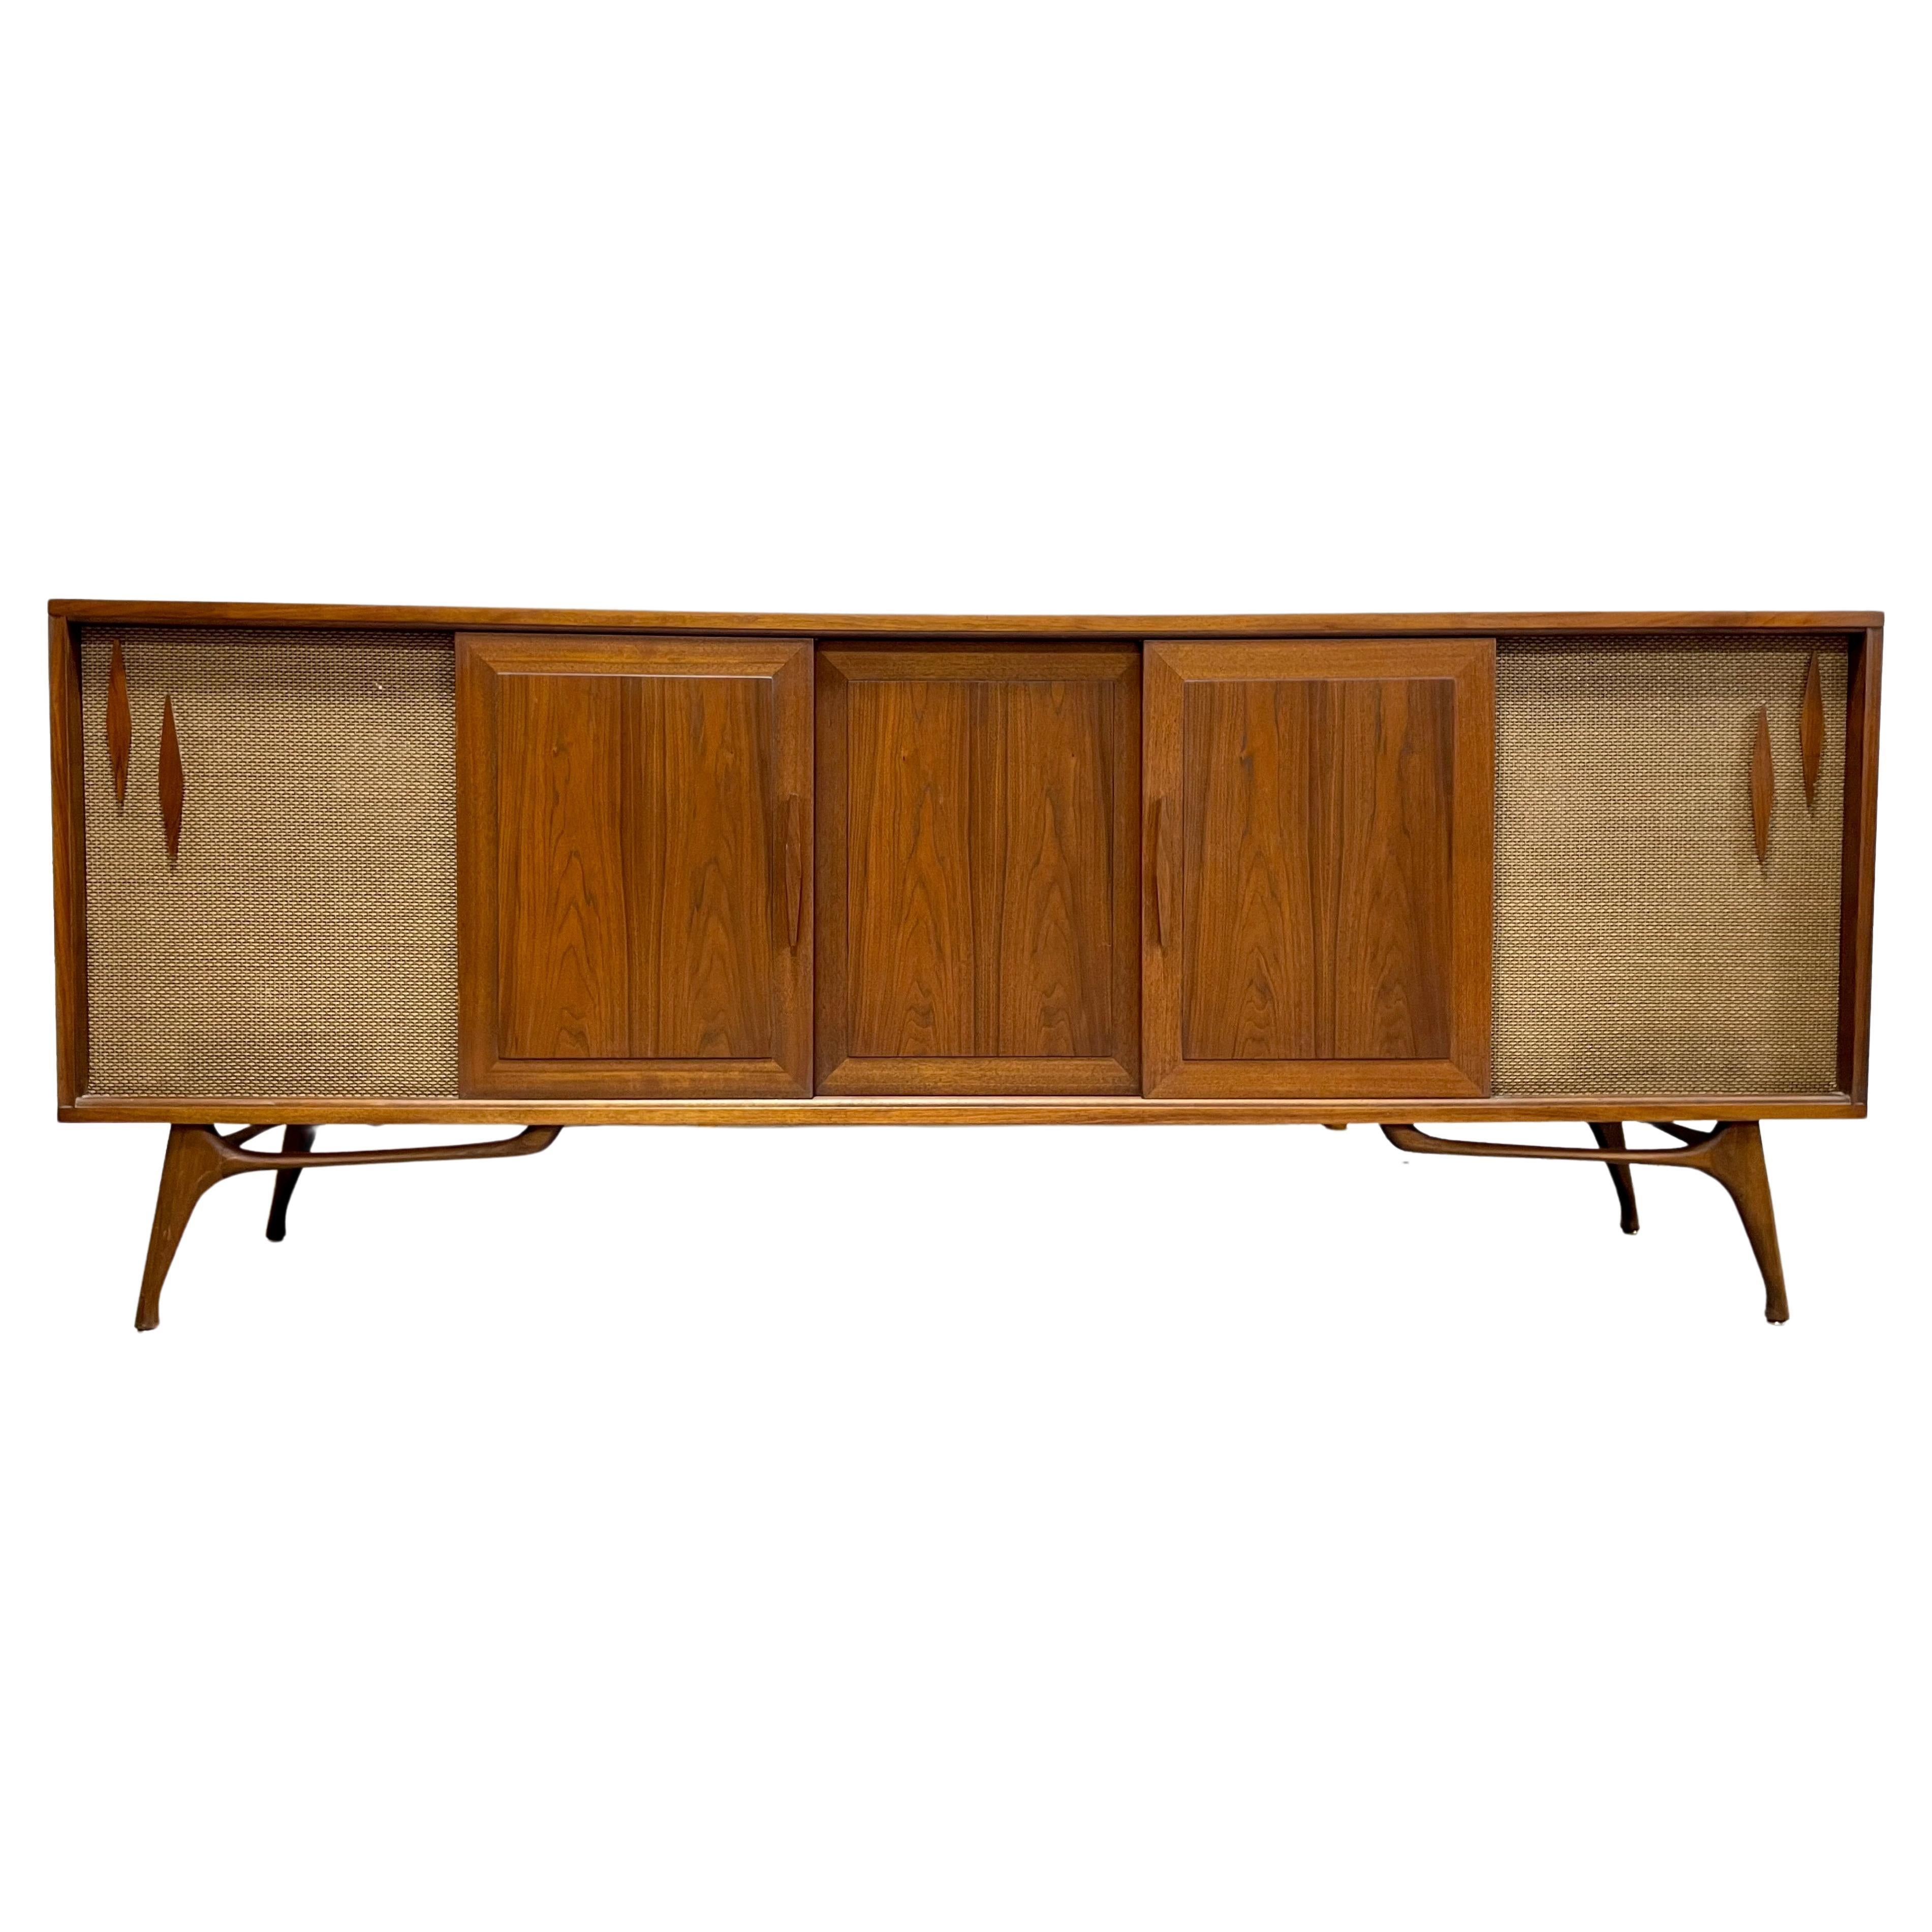 Extra LONG Mid Century MODERN Walnut Stereo Cabinet / CREDENZA / Media Stand